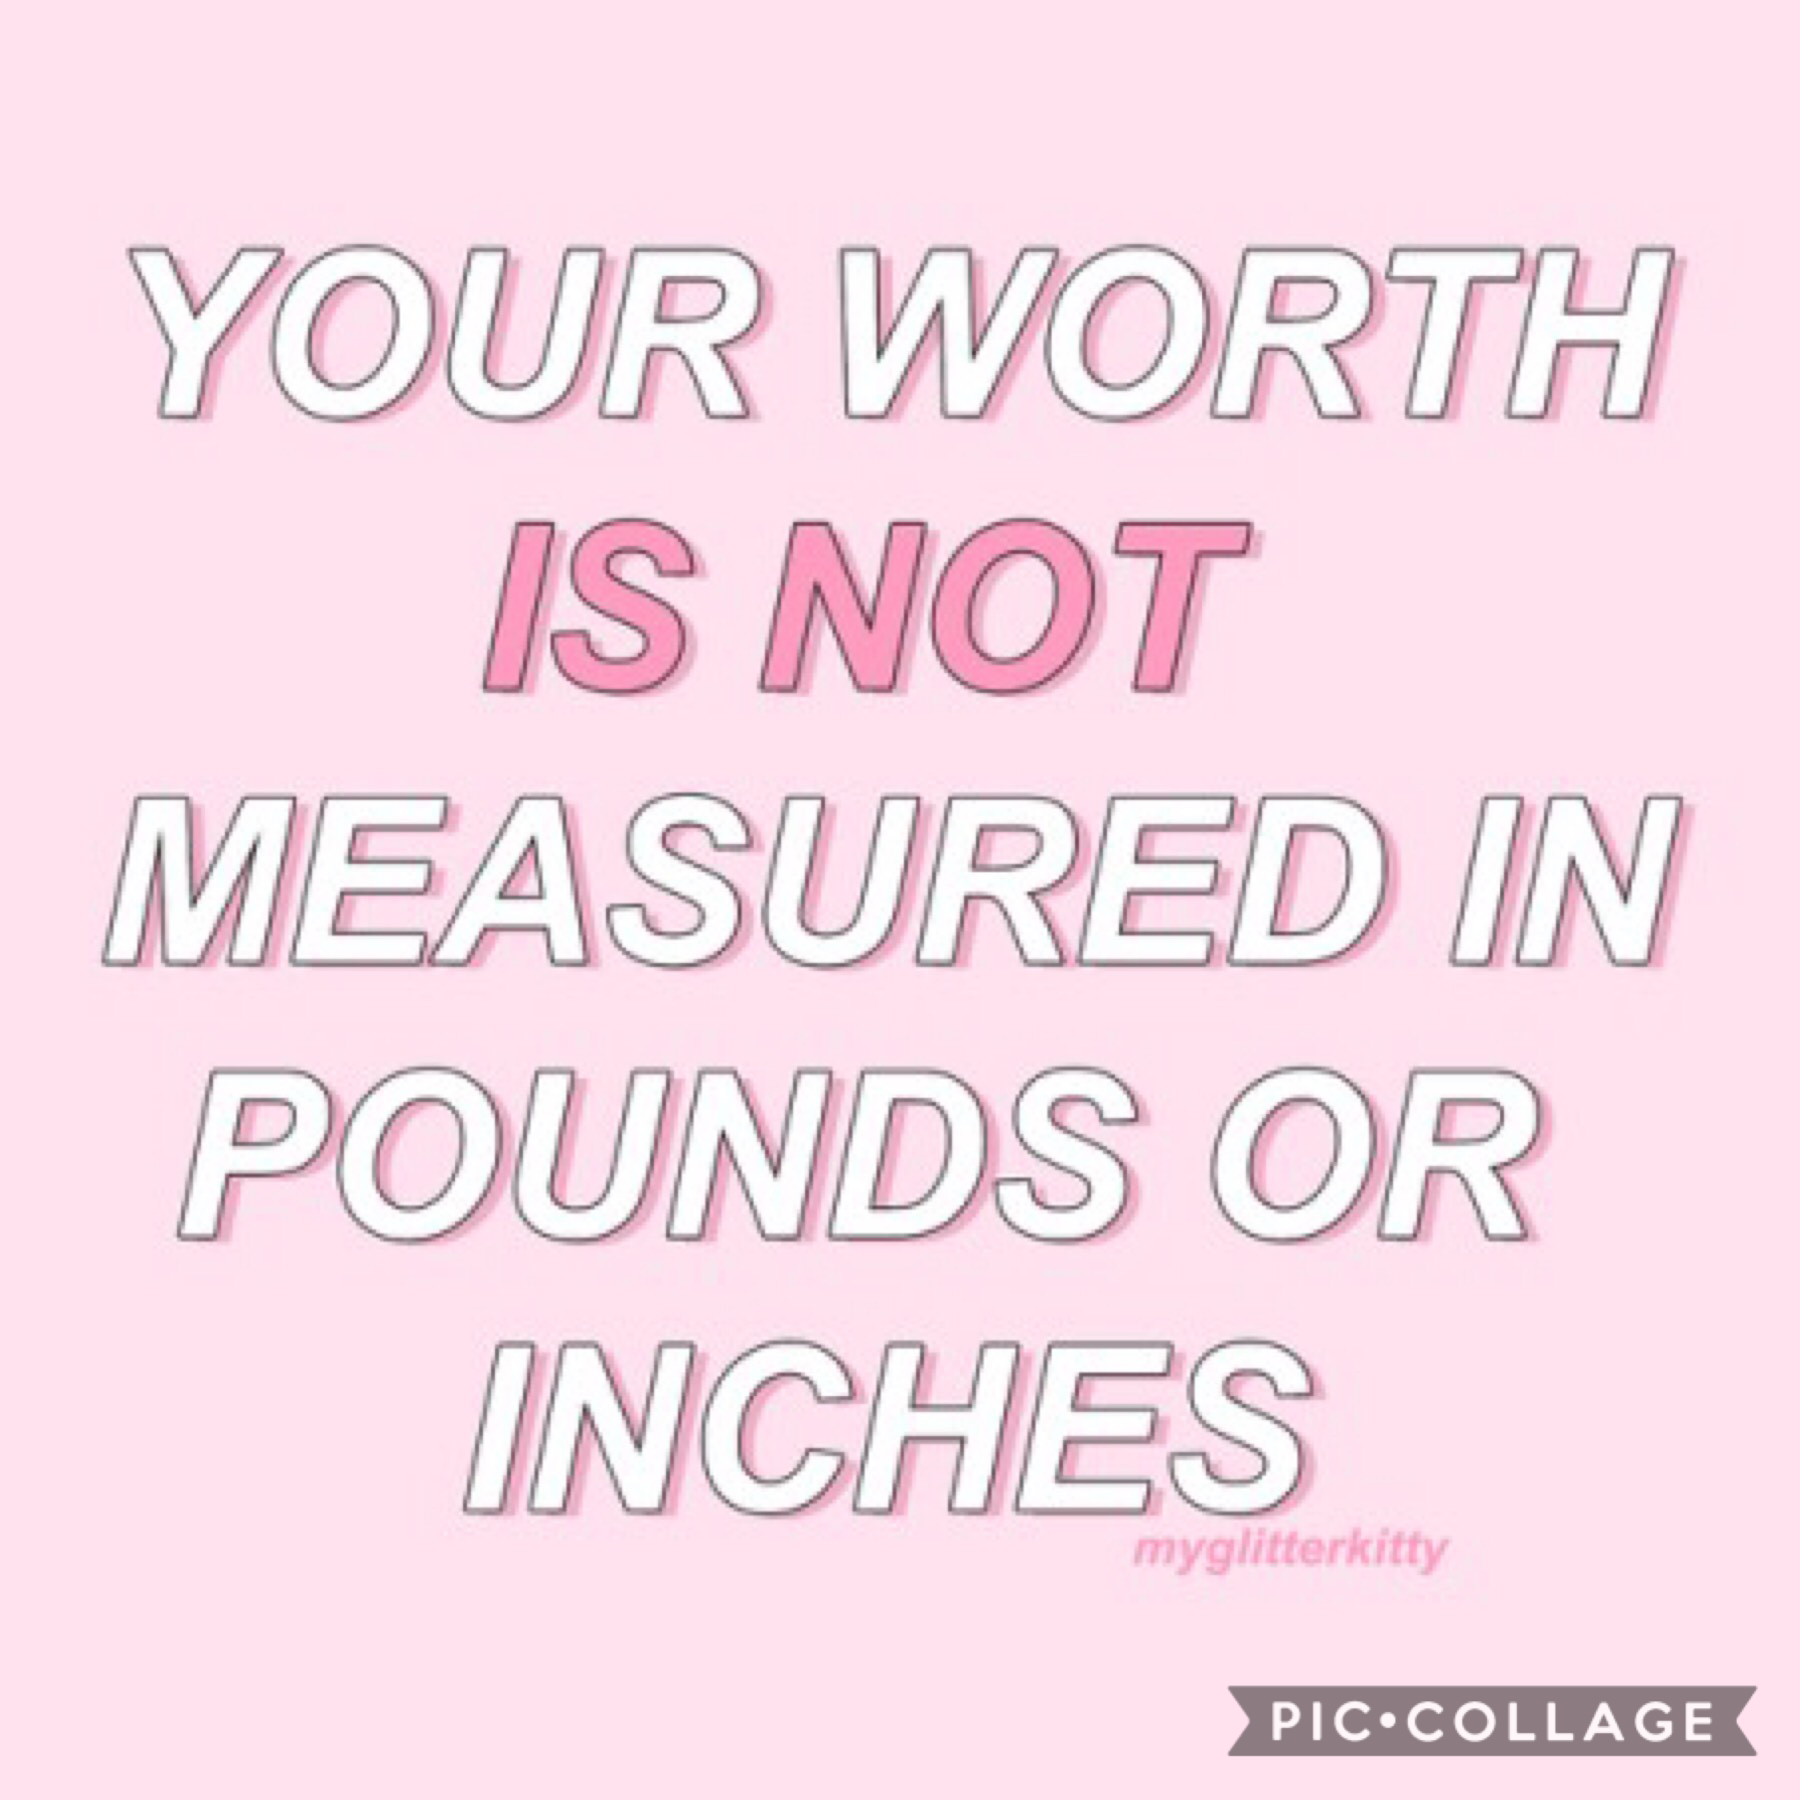 👏🏻👏🏻Truth👏🏻👏🏻please eat and drink enough, you are so much more than how much you weigh👣you are unique, inspiring, and so dárn beautiful💋